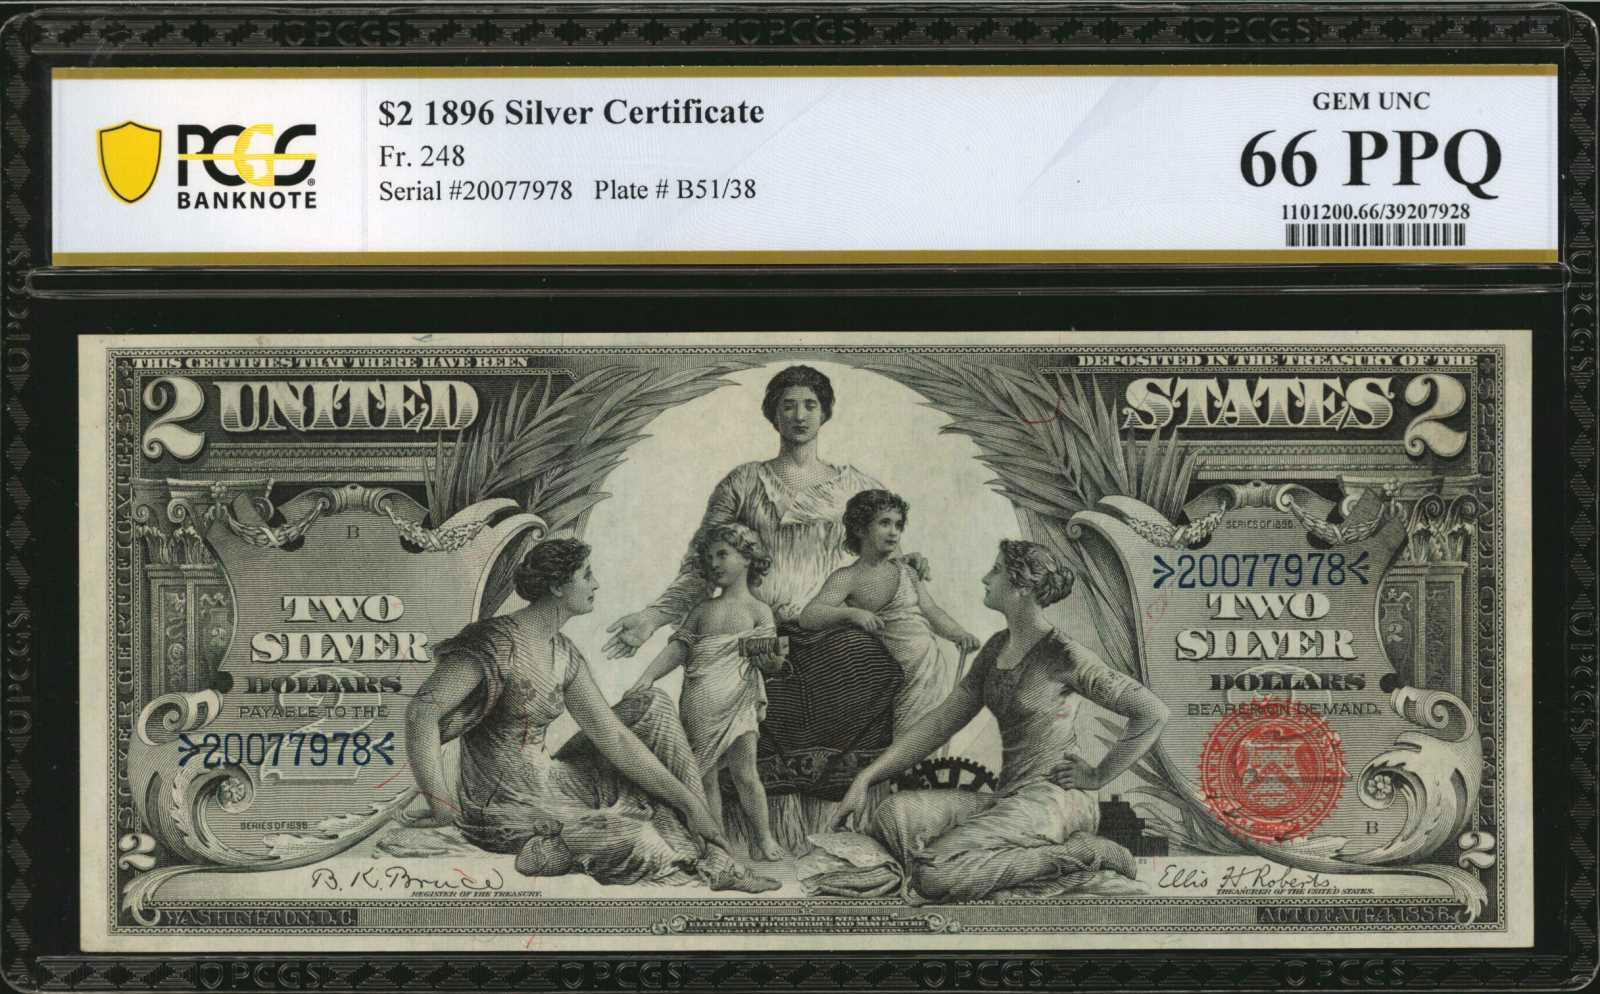 Face of Series of 1896 $2 Silver Certificate graded GEM UNC 66 PPQ by PCGS Banknote, Image courtesy of Stack’s Bowers Galleries